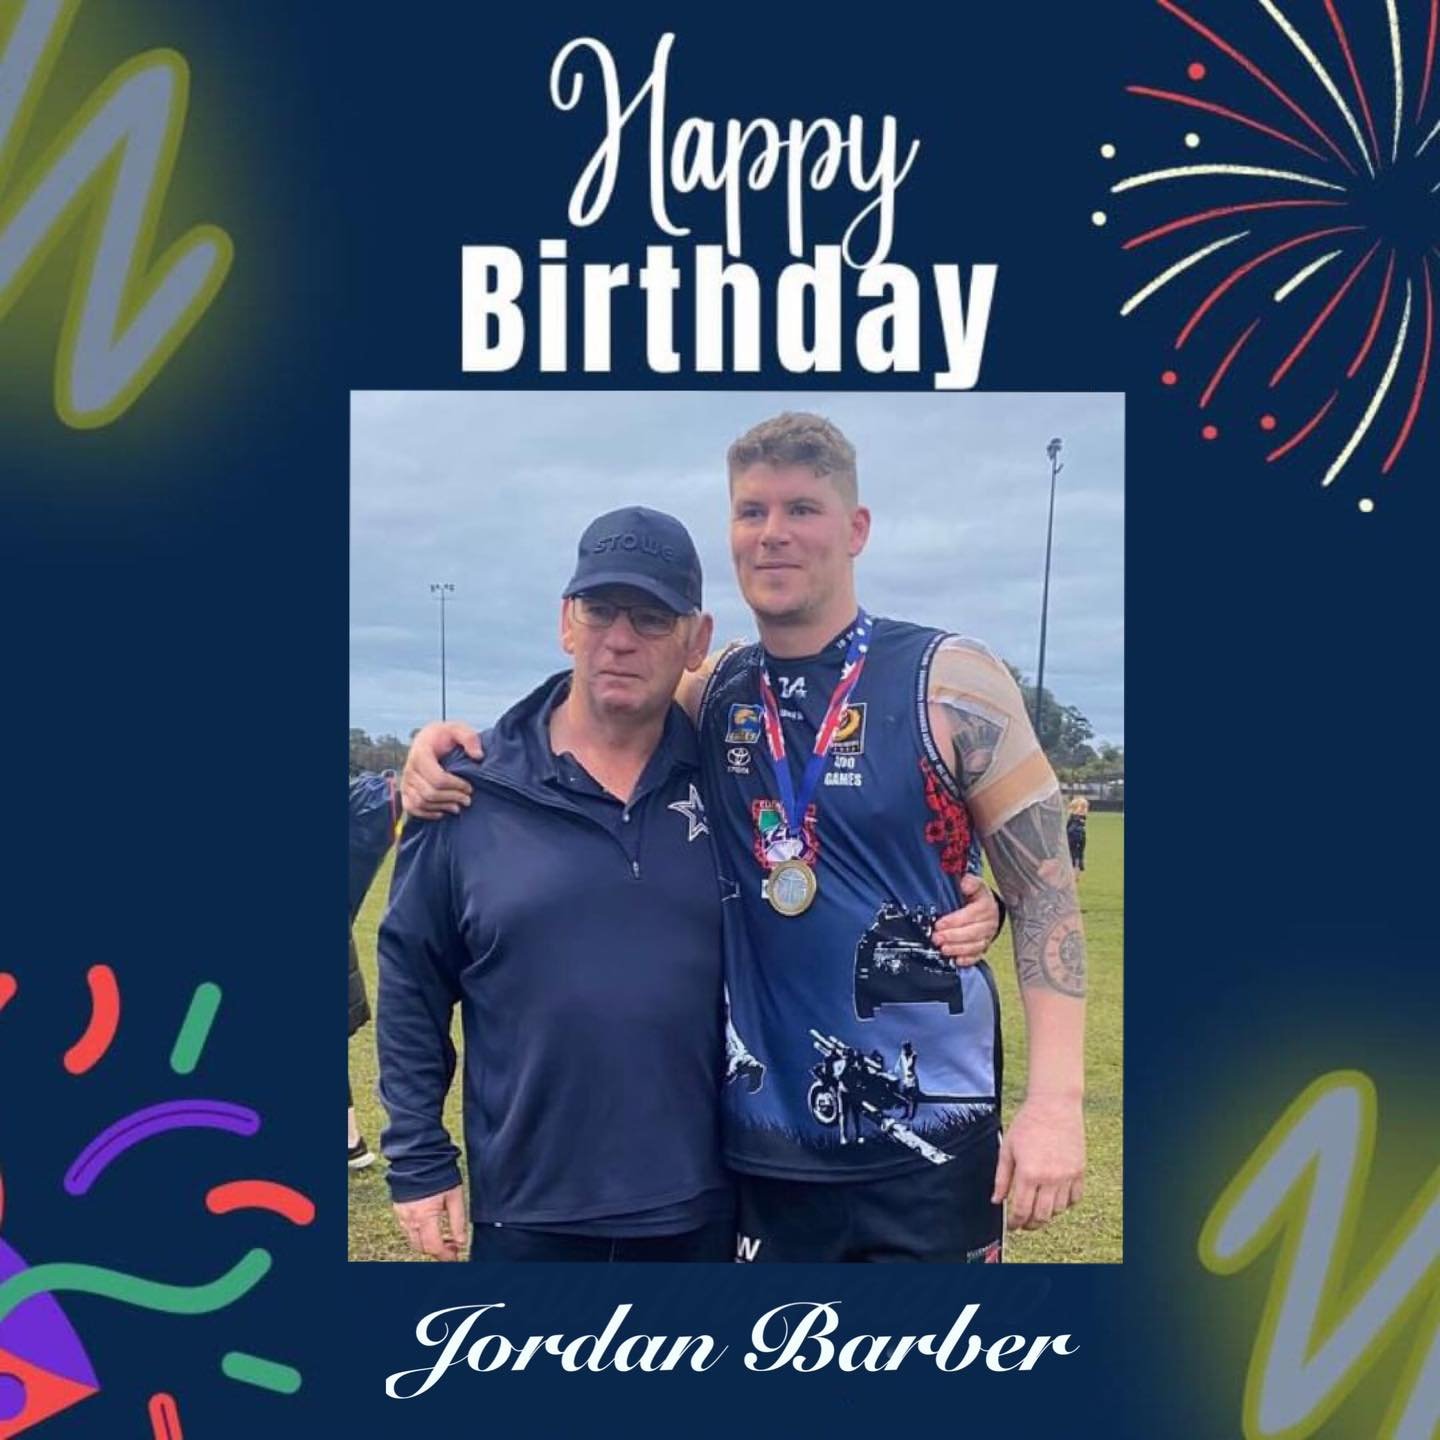 Happy birthday to our League Captain Jordan Barber.

We hope you have a great day with the family